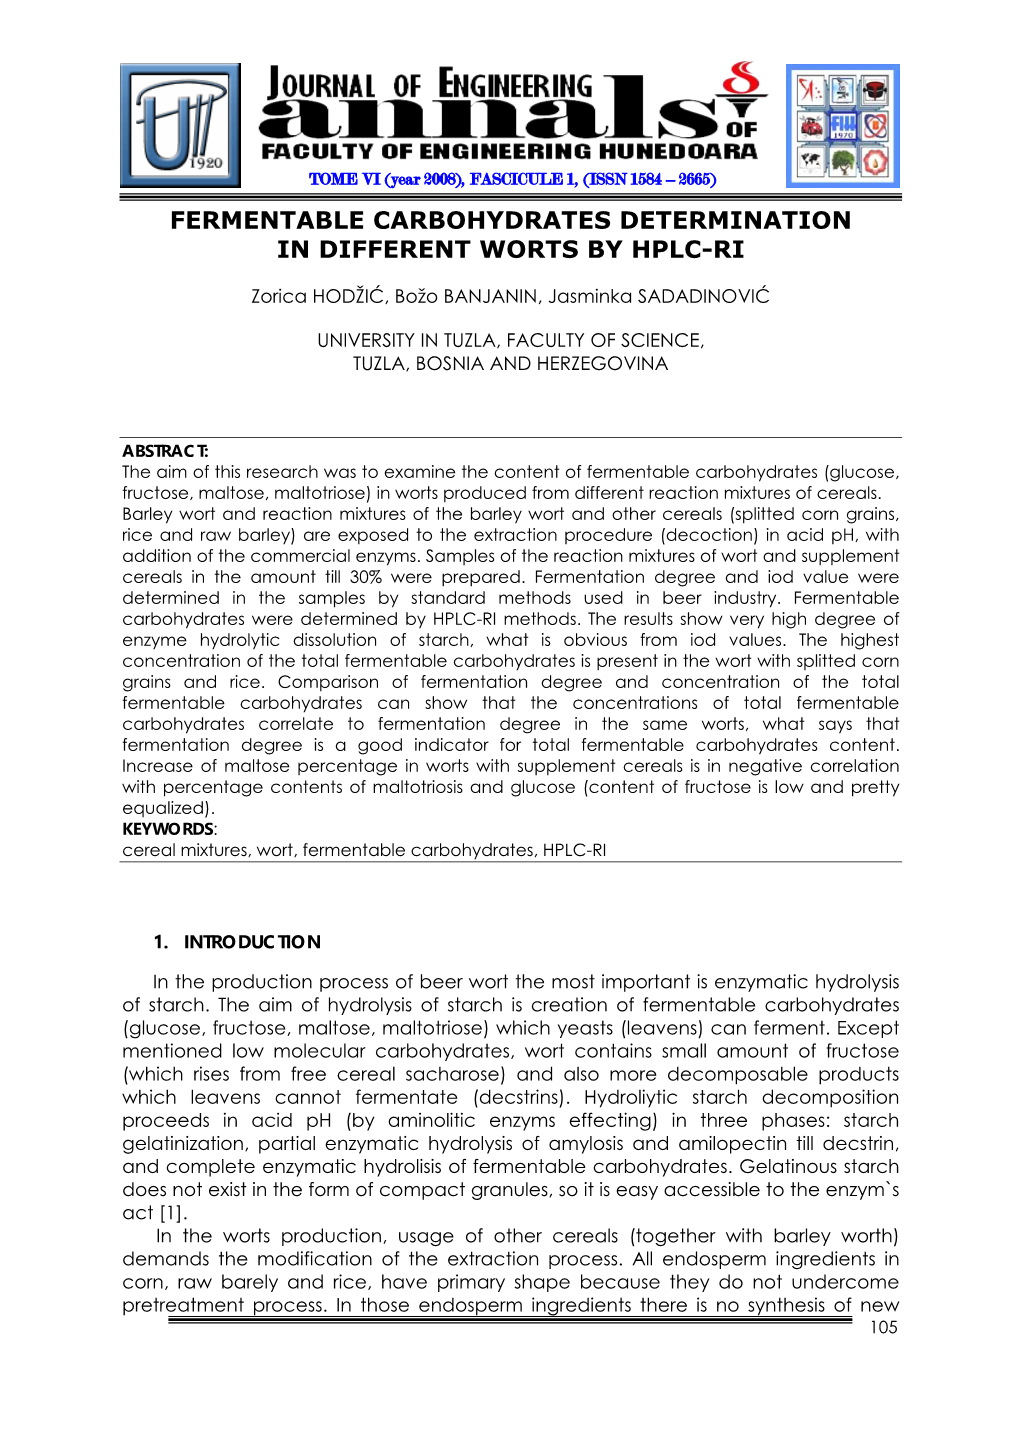 Fermentable Carbohydrates Determination in Different Worts by Hplc-Ri